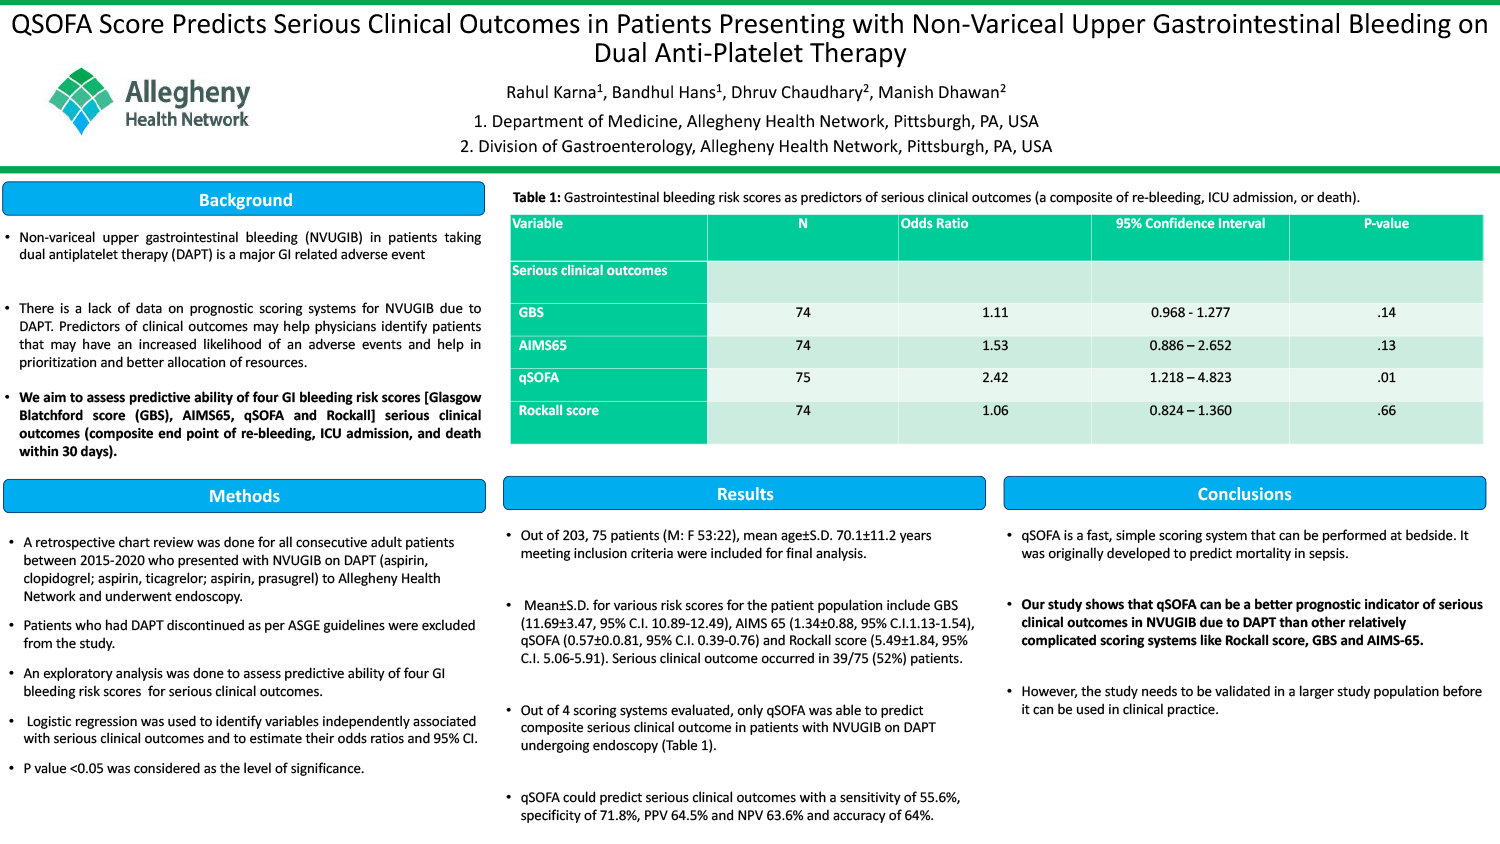 Rahul Karna - PAW-38-QSOFA Score Predicts Serious Clinical Outcomes in Patients Presenting with NVUGIB on DAPT